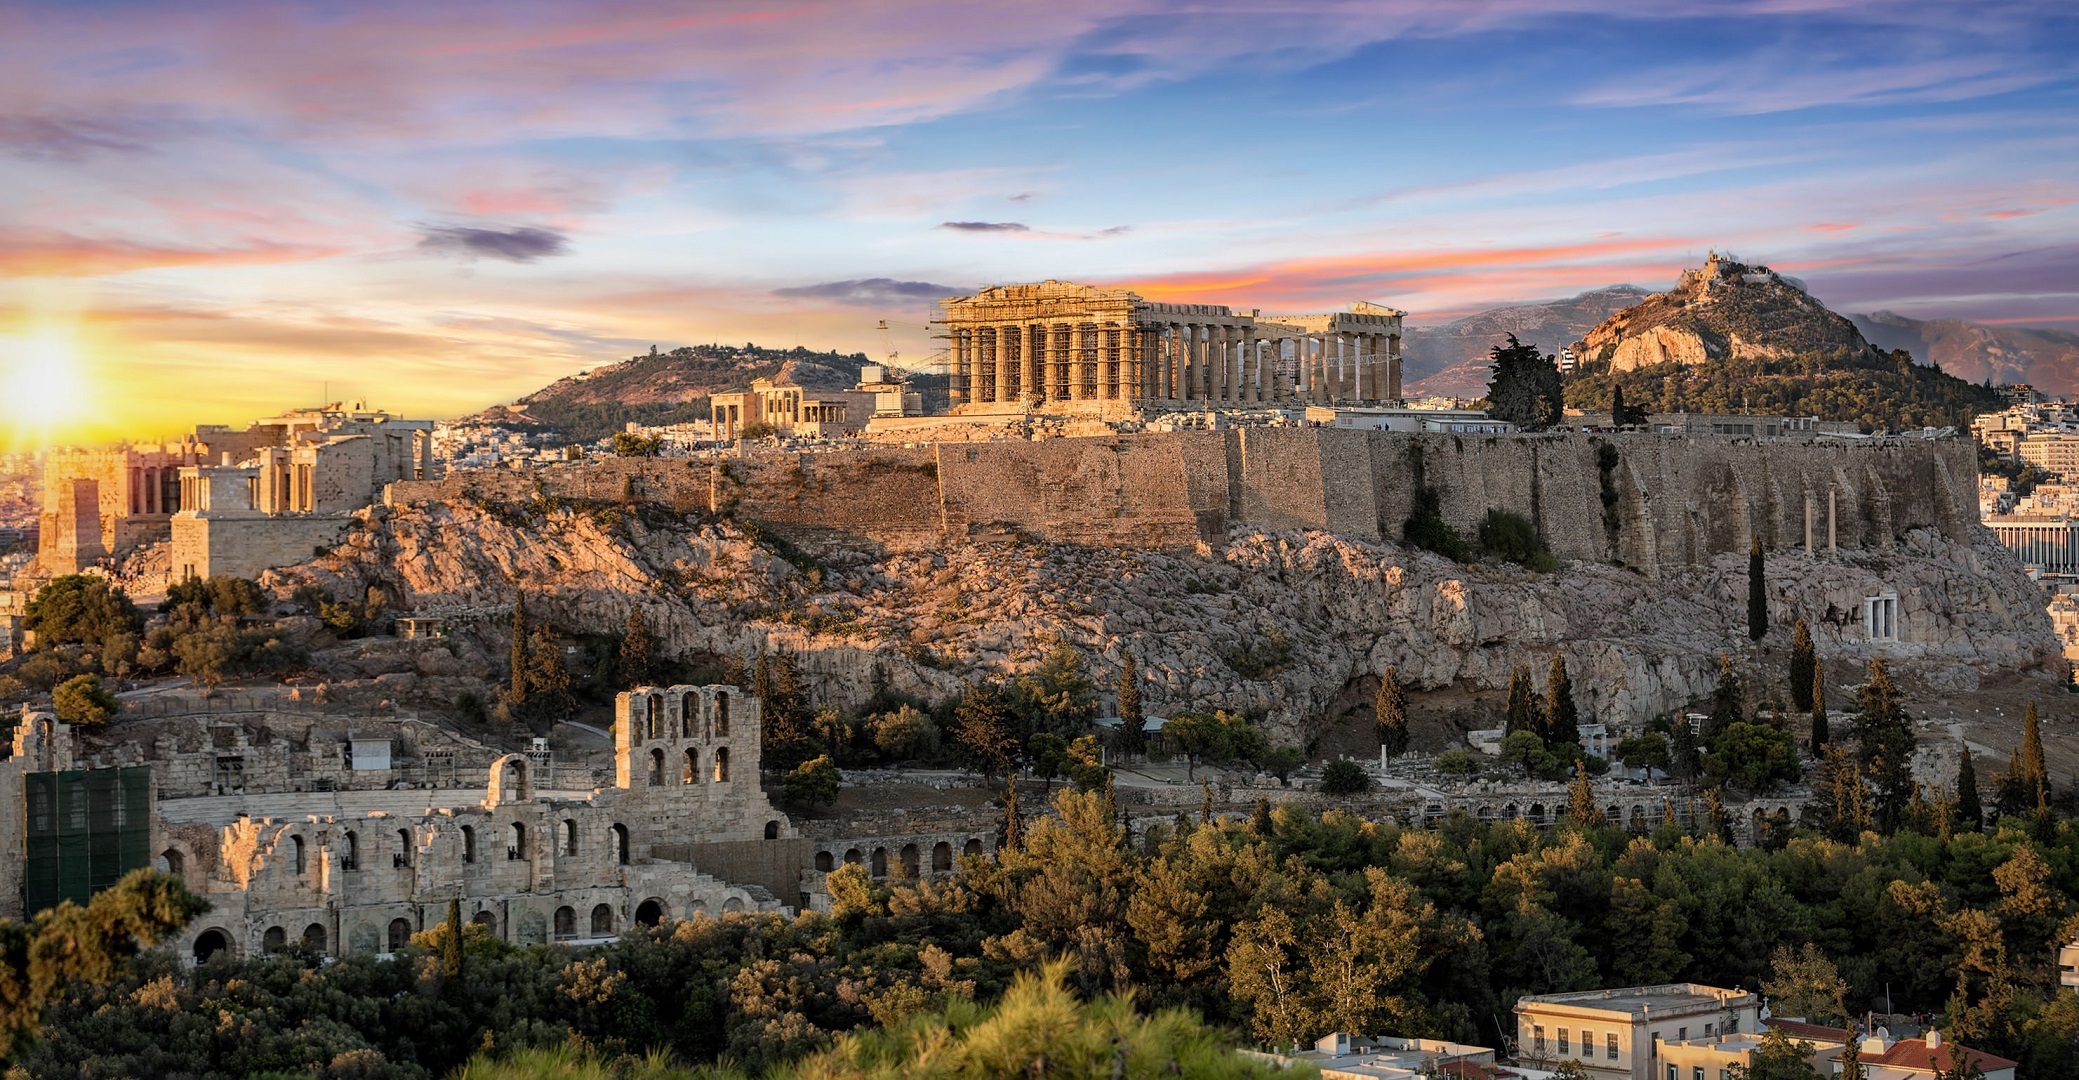 Athens Greece Ruins Architecture Sunset Glow 2079x1080